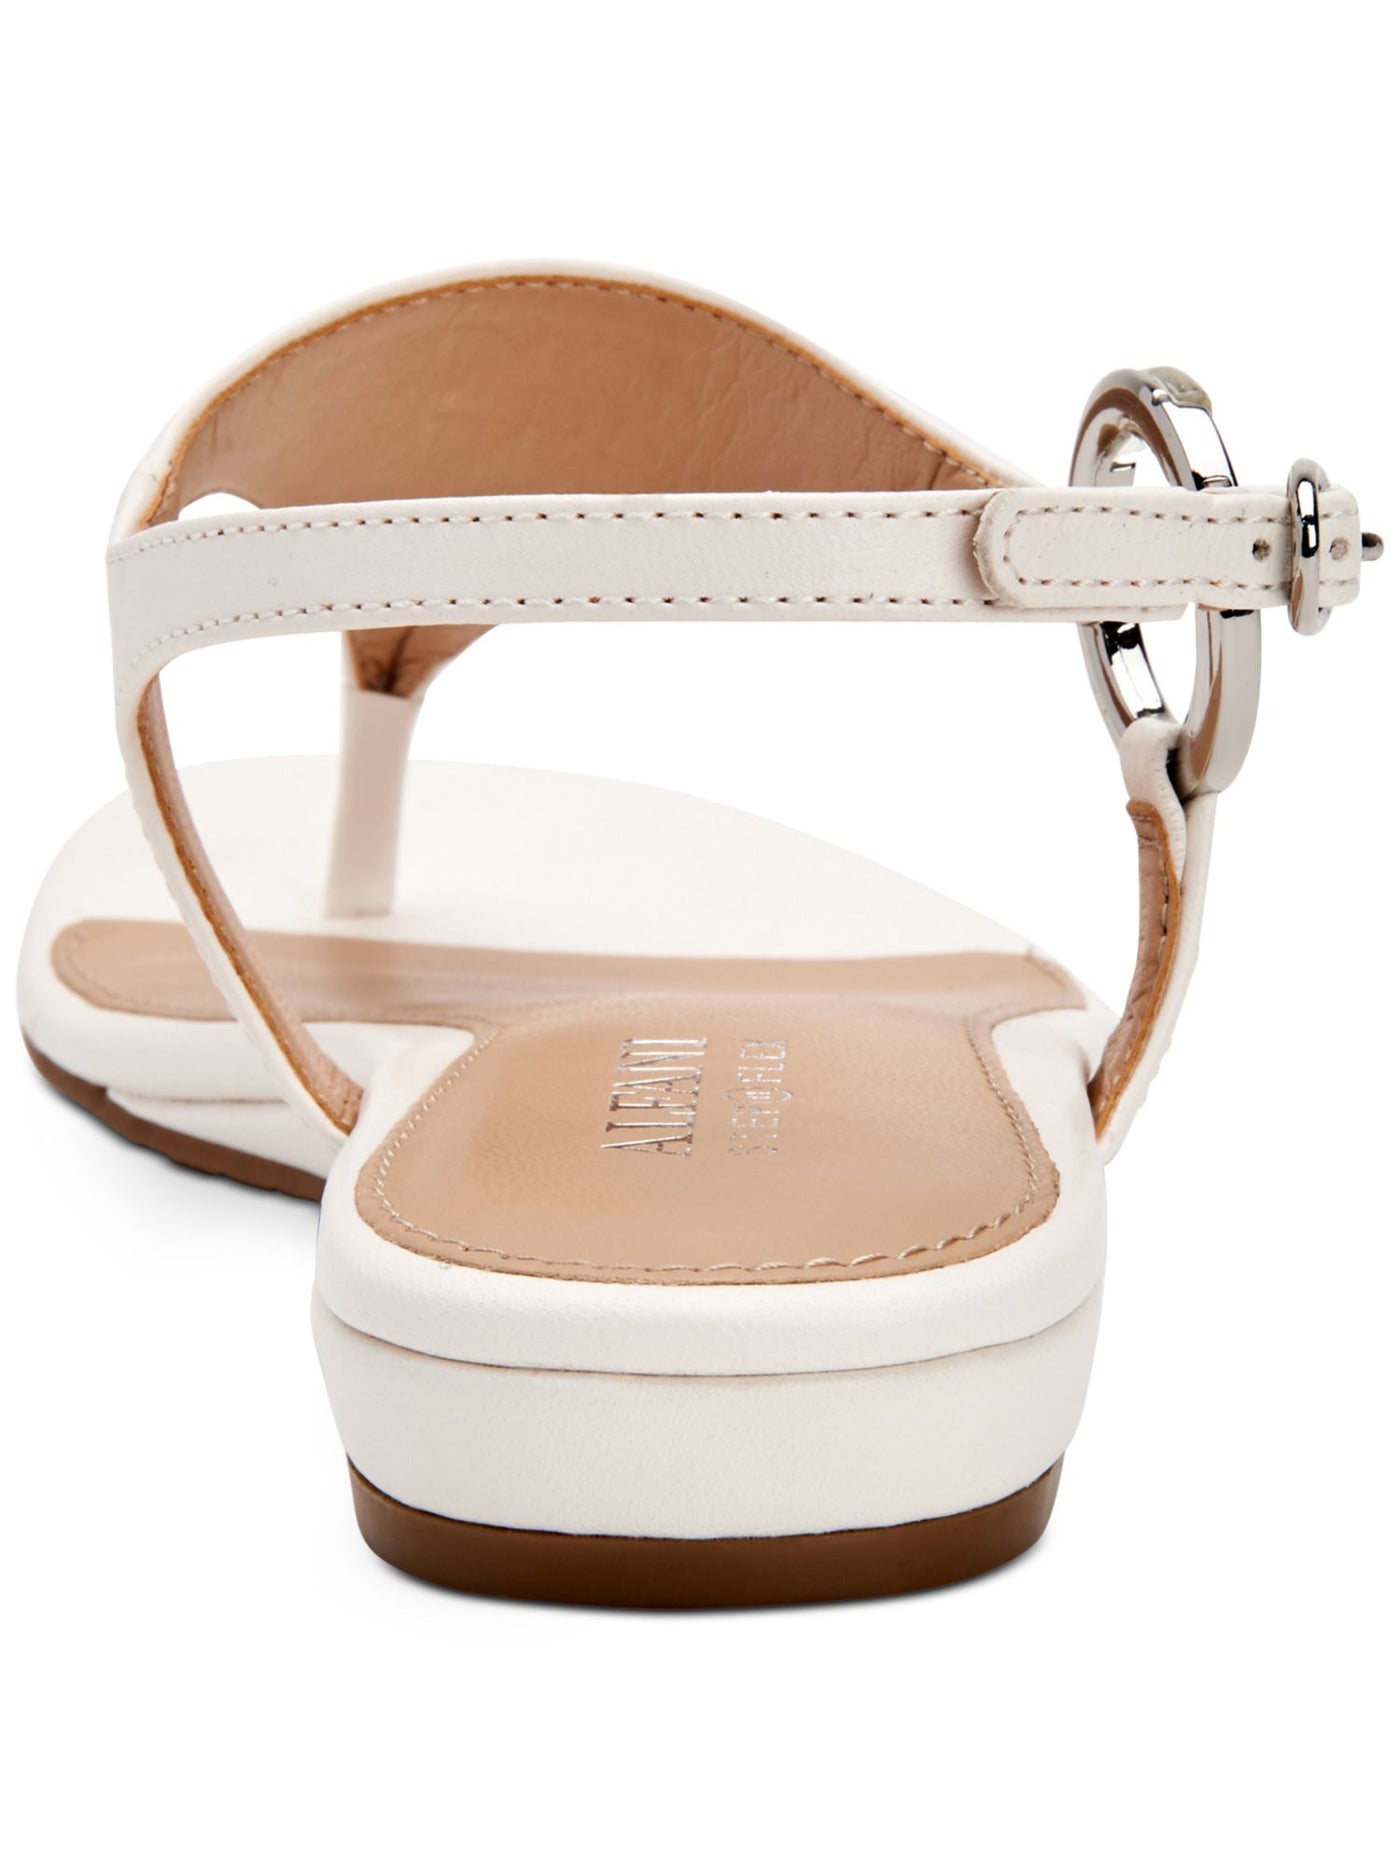 ALFANI Womens White Ring Hardware Shield Hayyden Round Toe Buckle Thong Sandals Shoes 9 M